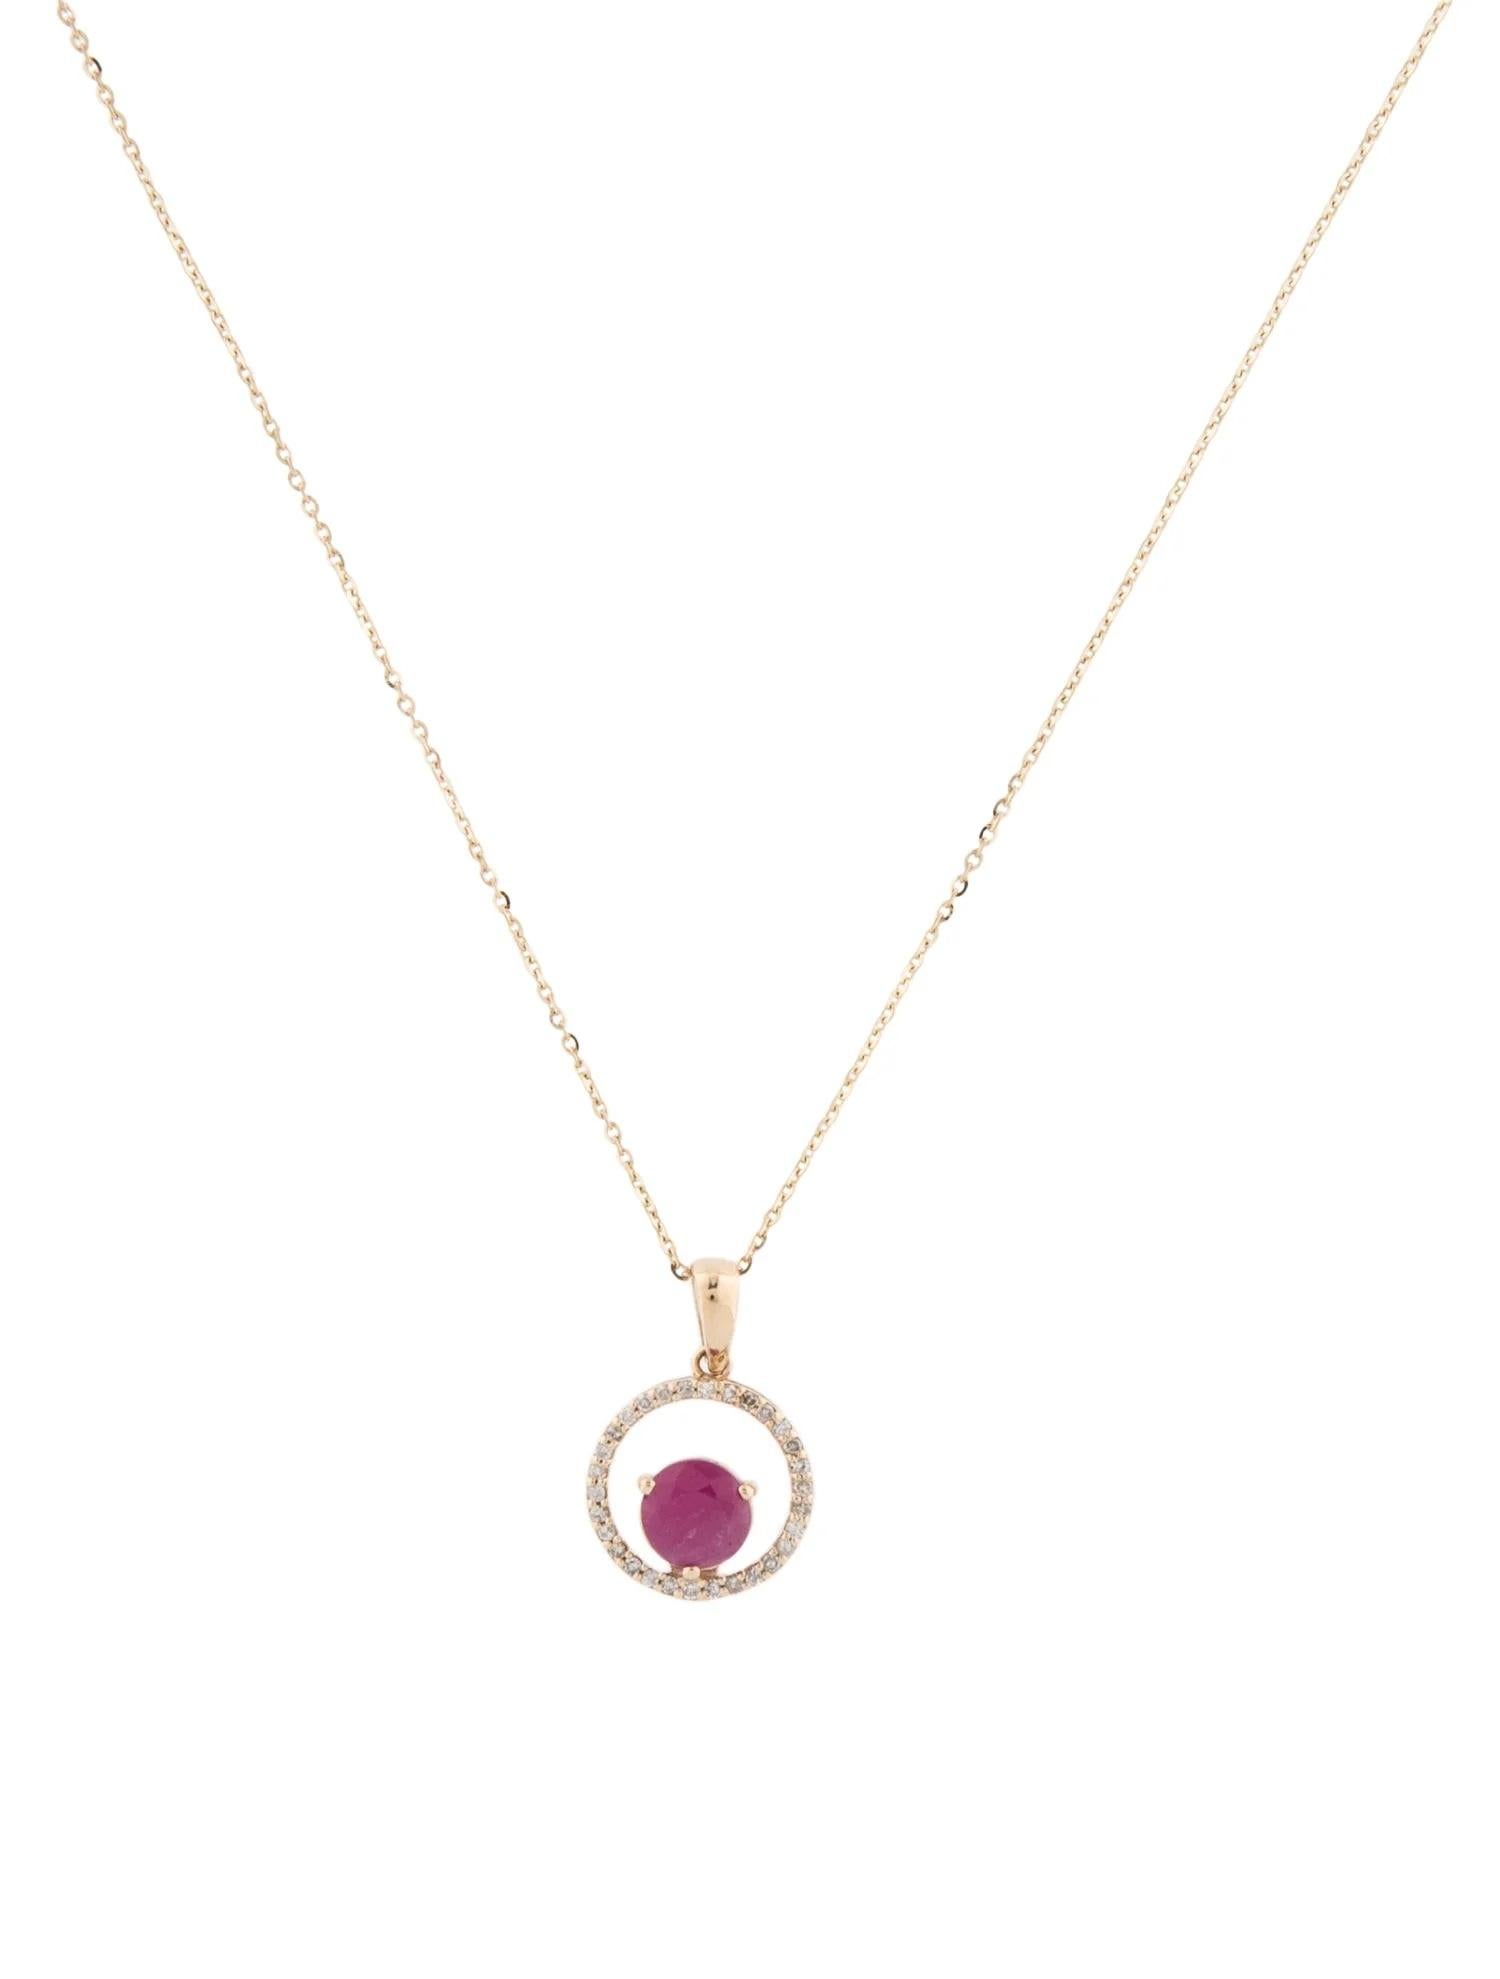 Round Cut 14K Ruby & Diamond Pendant Necklace  Yellow Gold  Round Ruby  0.86ct  Near C For Sale